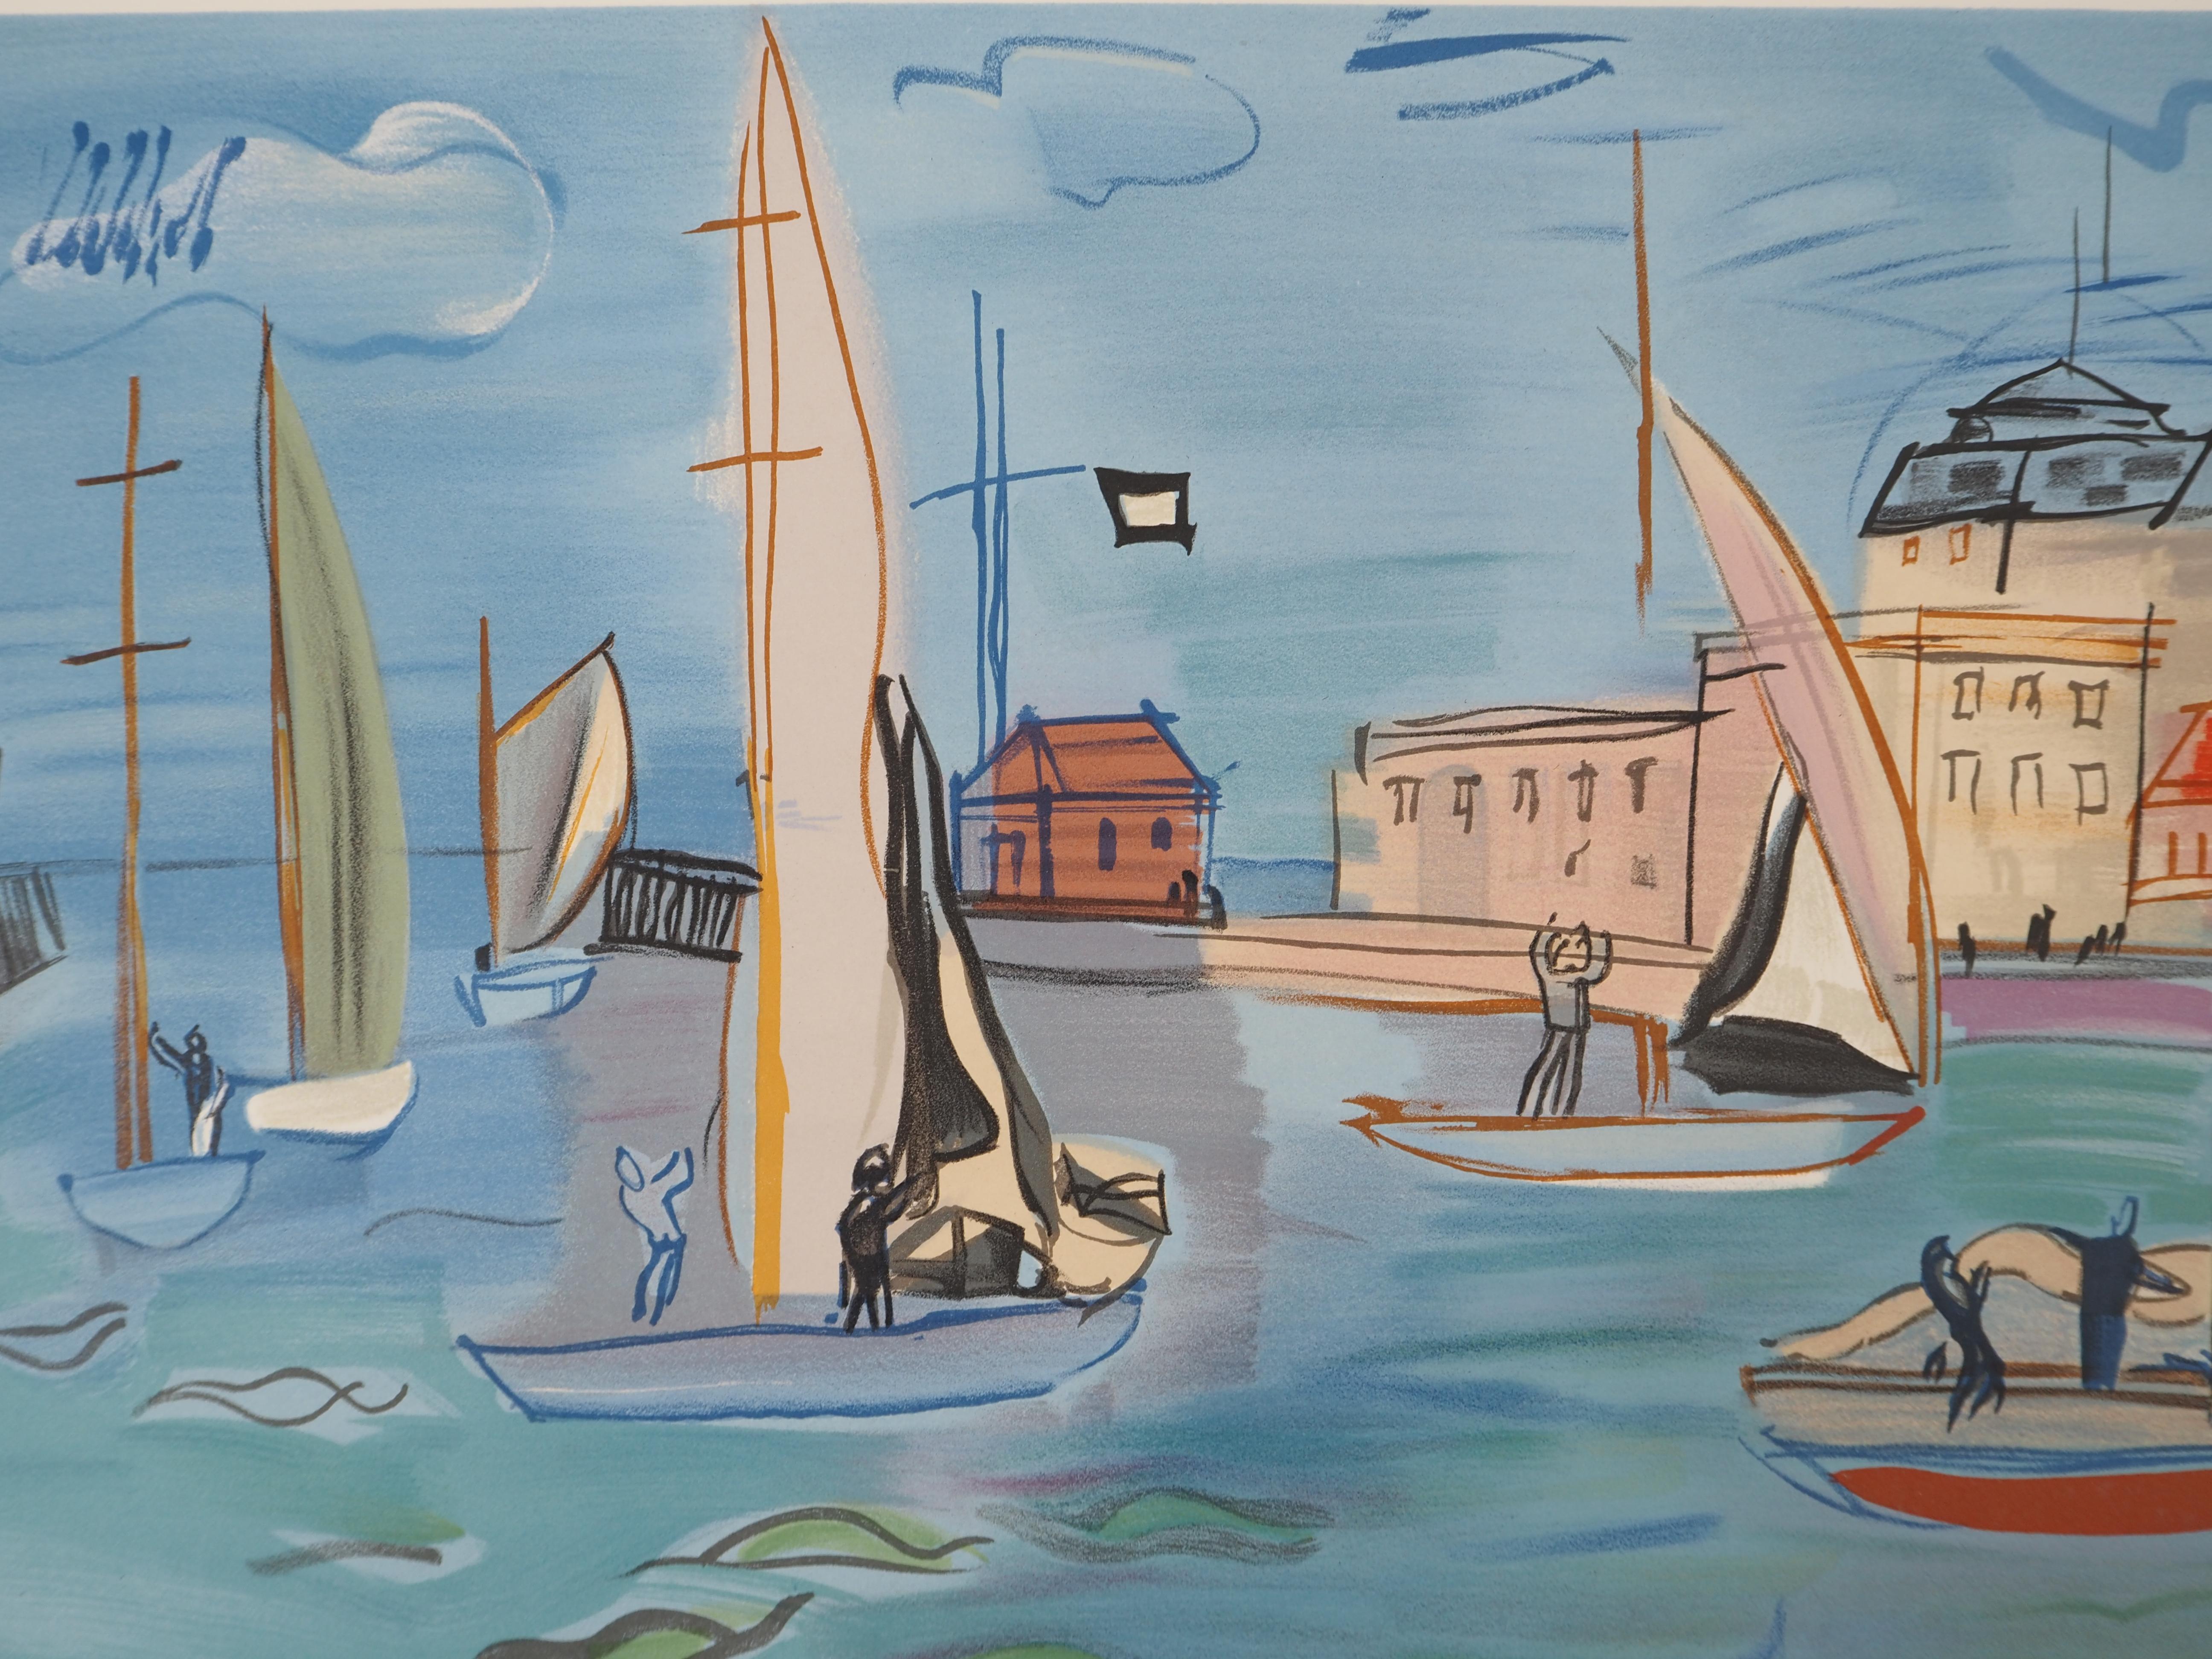 Raoul DUFY
Sailboats 

Stone lithograph after a painting (Mourlot workshop)
Printed signature in the plate
On Arches vellum 50 x 65 cm (c. 20 x 26 in)

Excellent condition